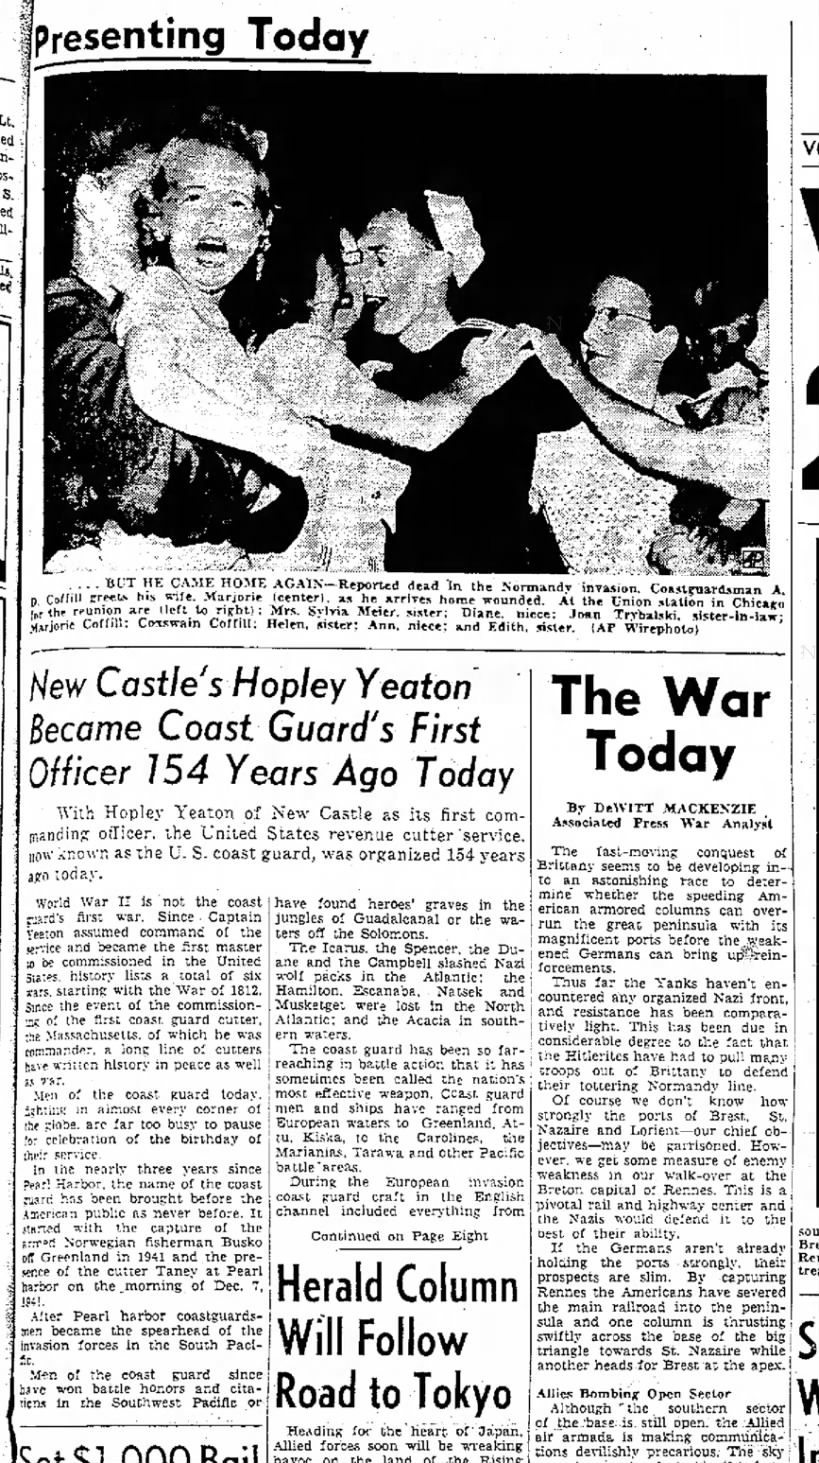 The Portsmouth Herald, 1944.08.04